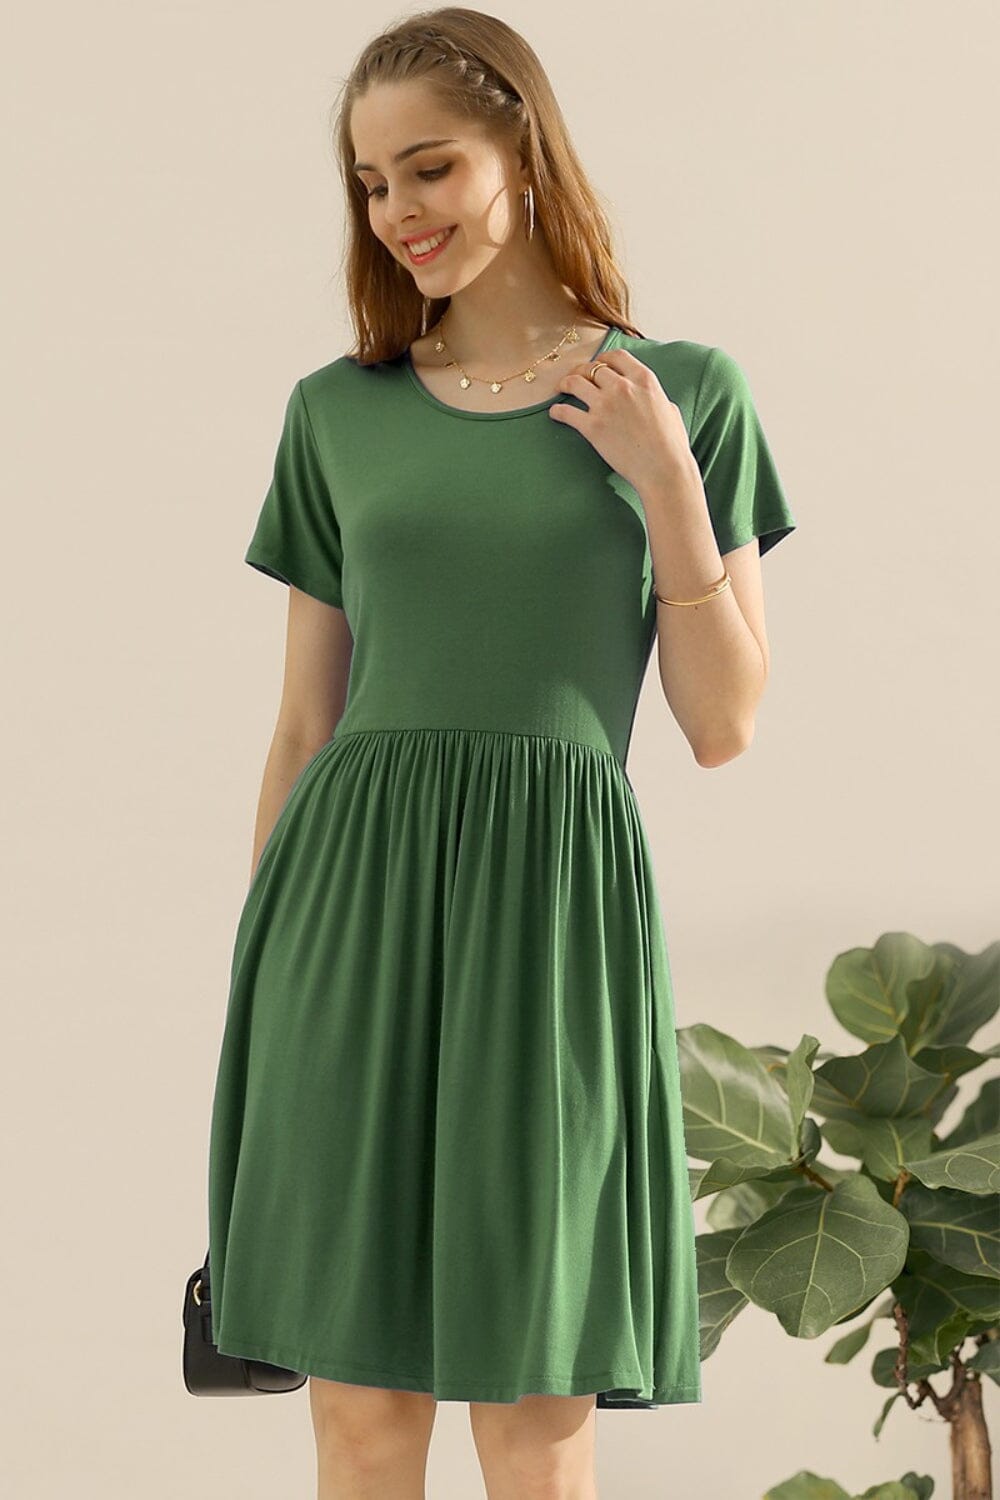 Ninexis Round Neck Ruched Dress with Pockets Dresses jehouze OLIVE S 